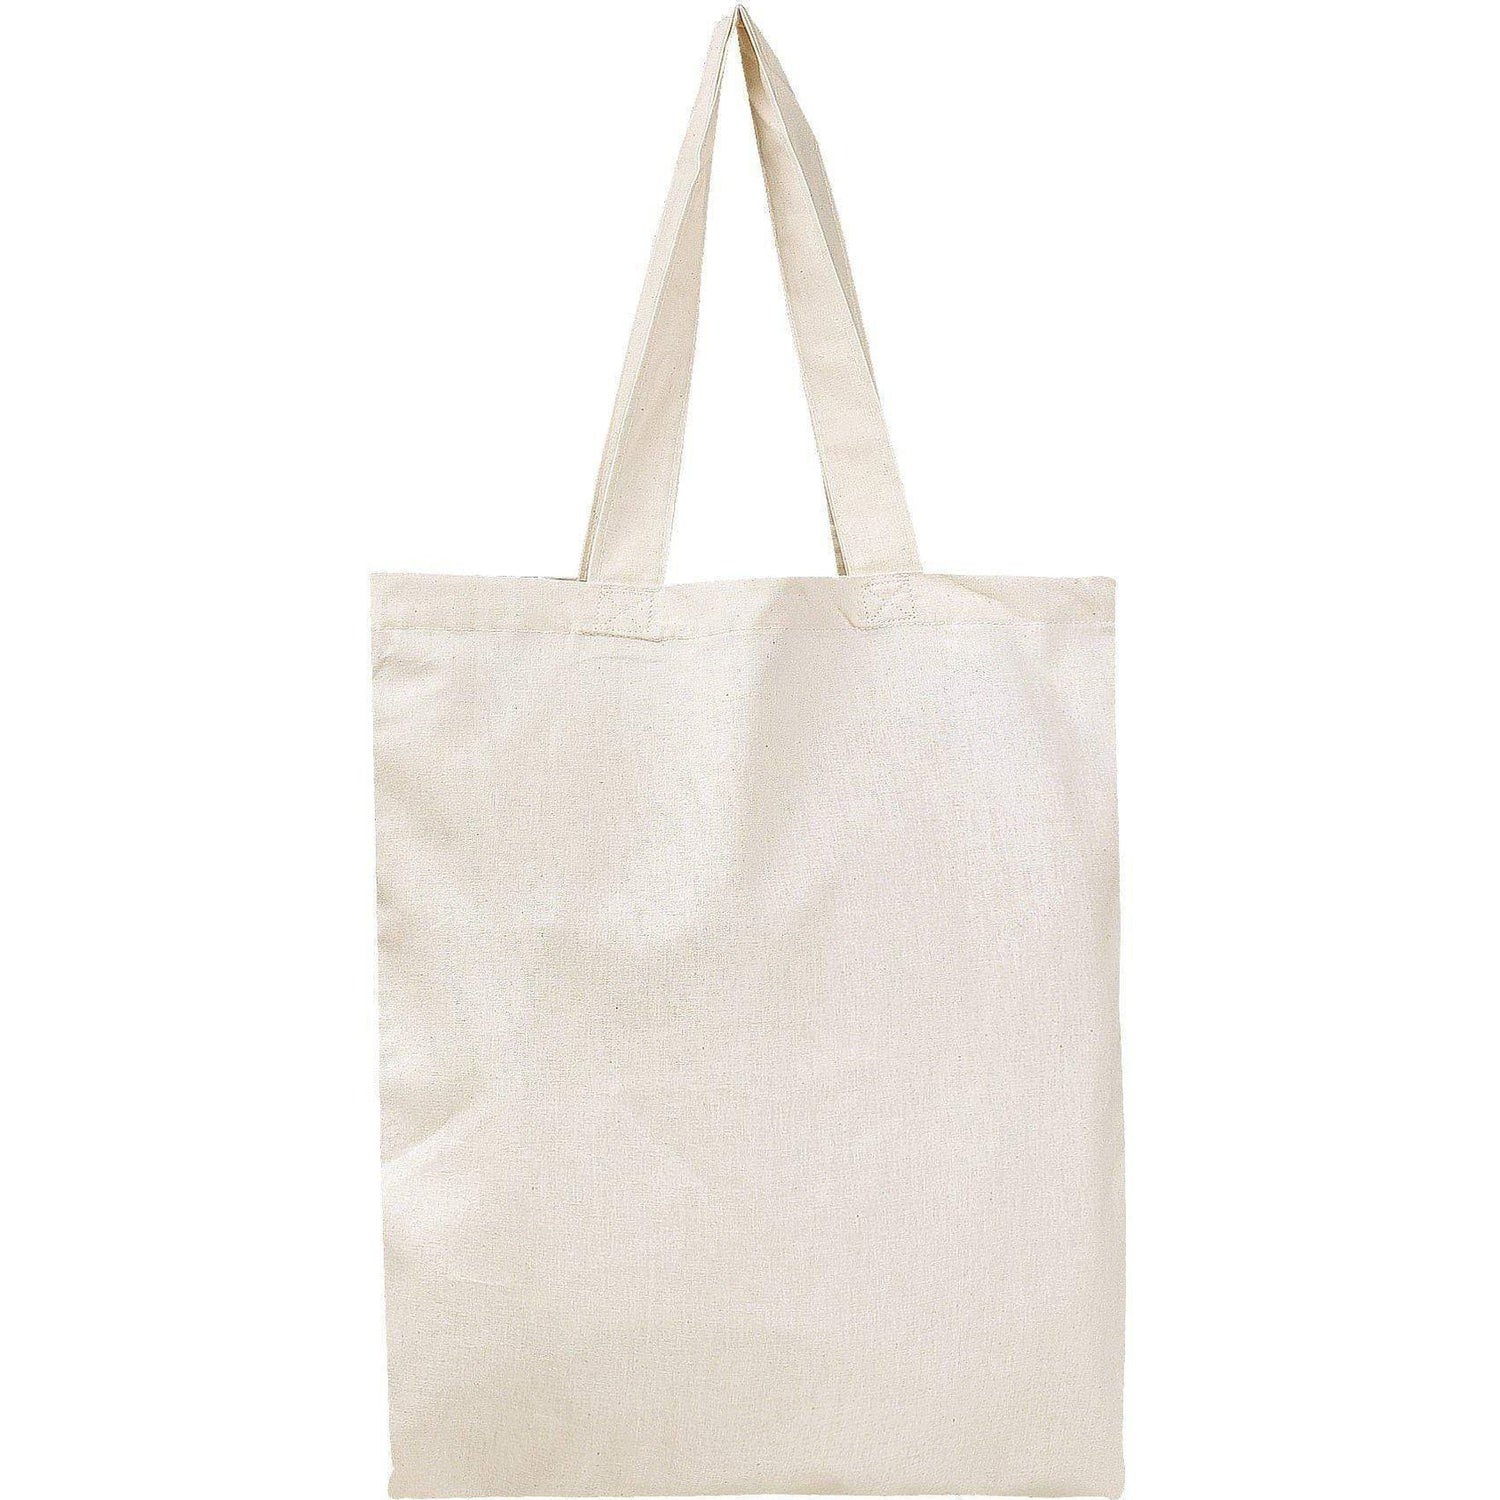 Cotton Canvas Tote Bags in Bulk - 12 Pack - Cotton Tote Bags Wholesale – BagzDepot™